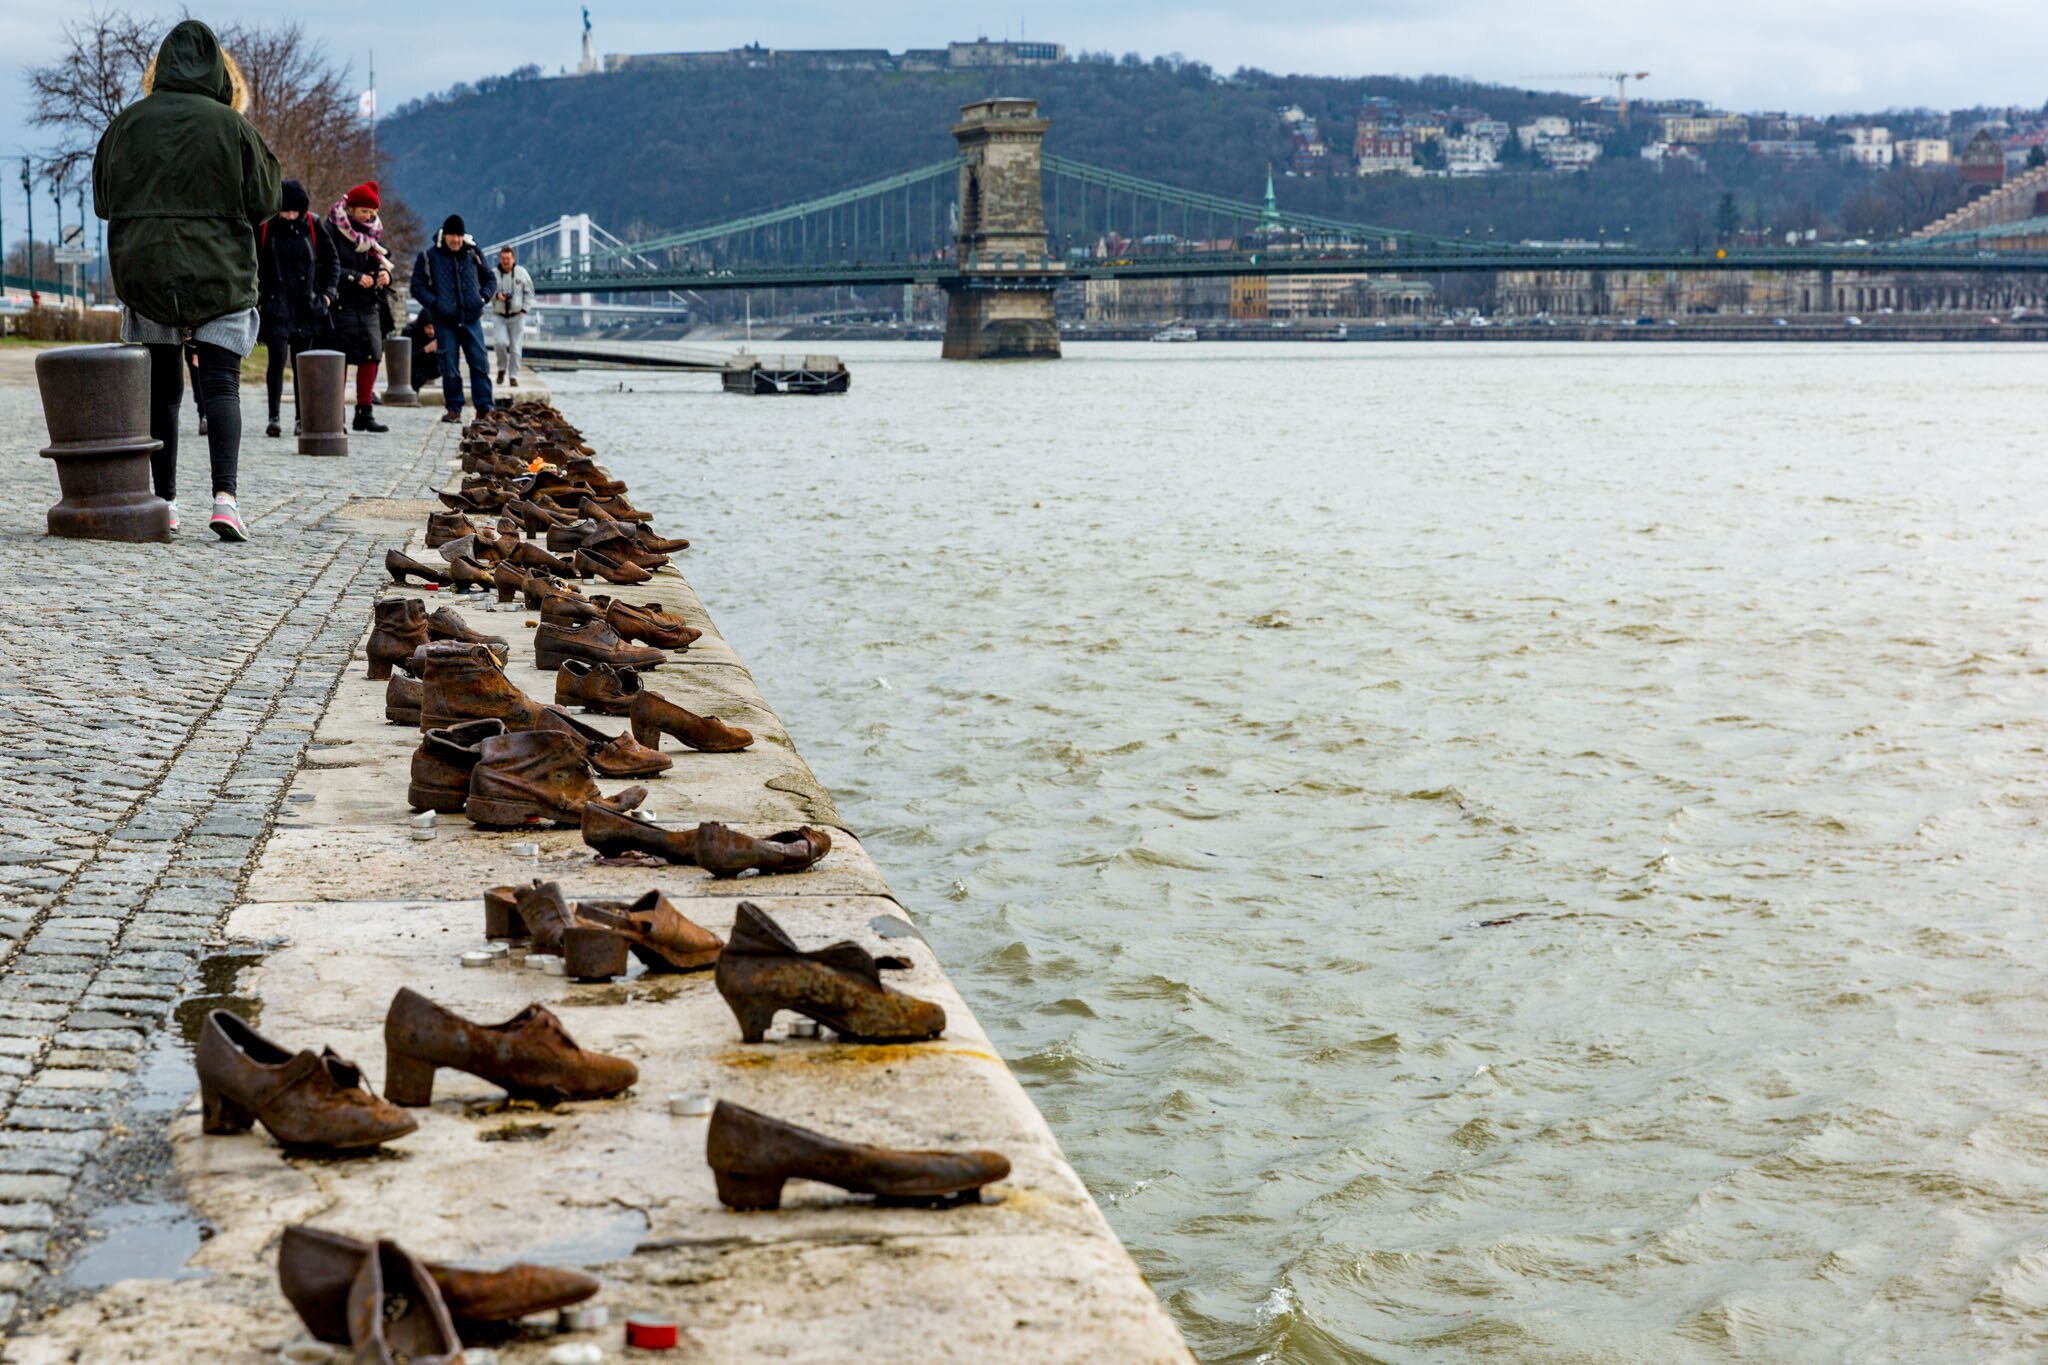 Shoes on the Danube Memorial